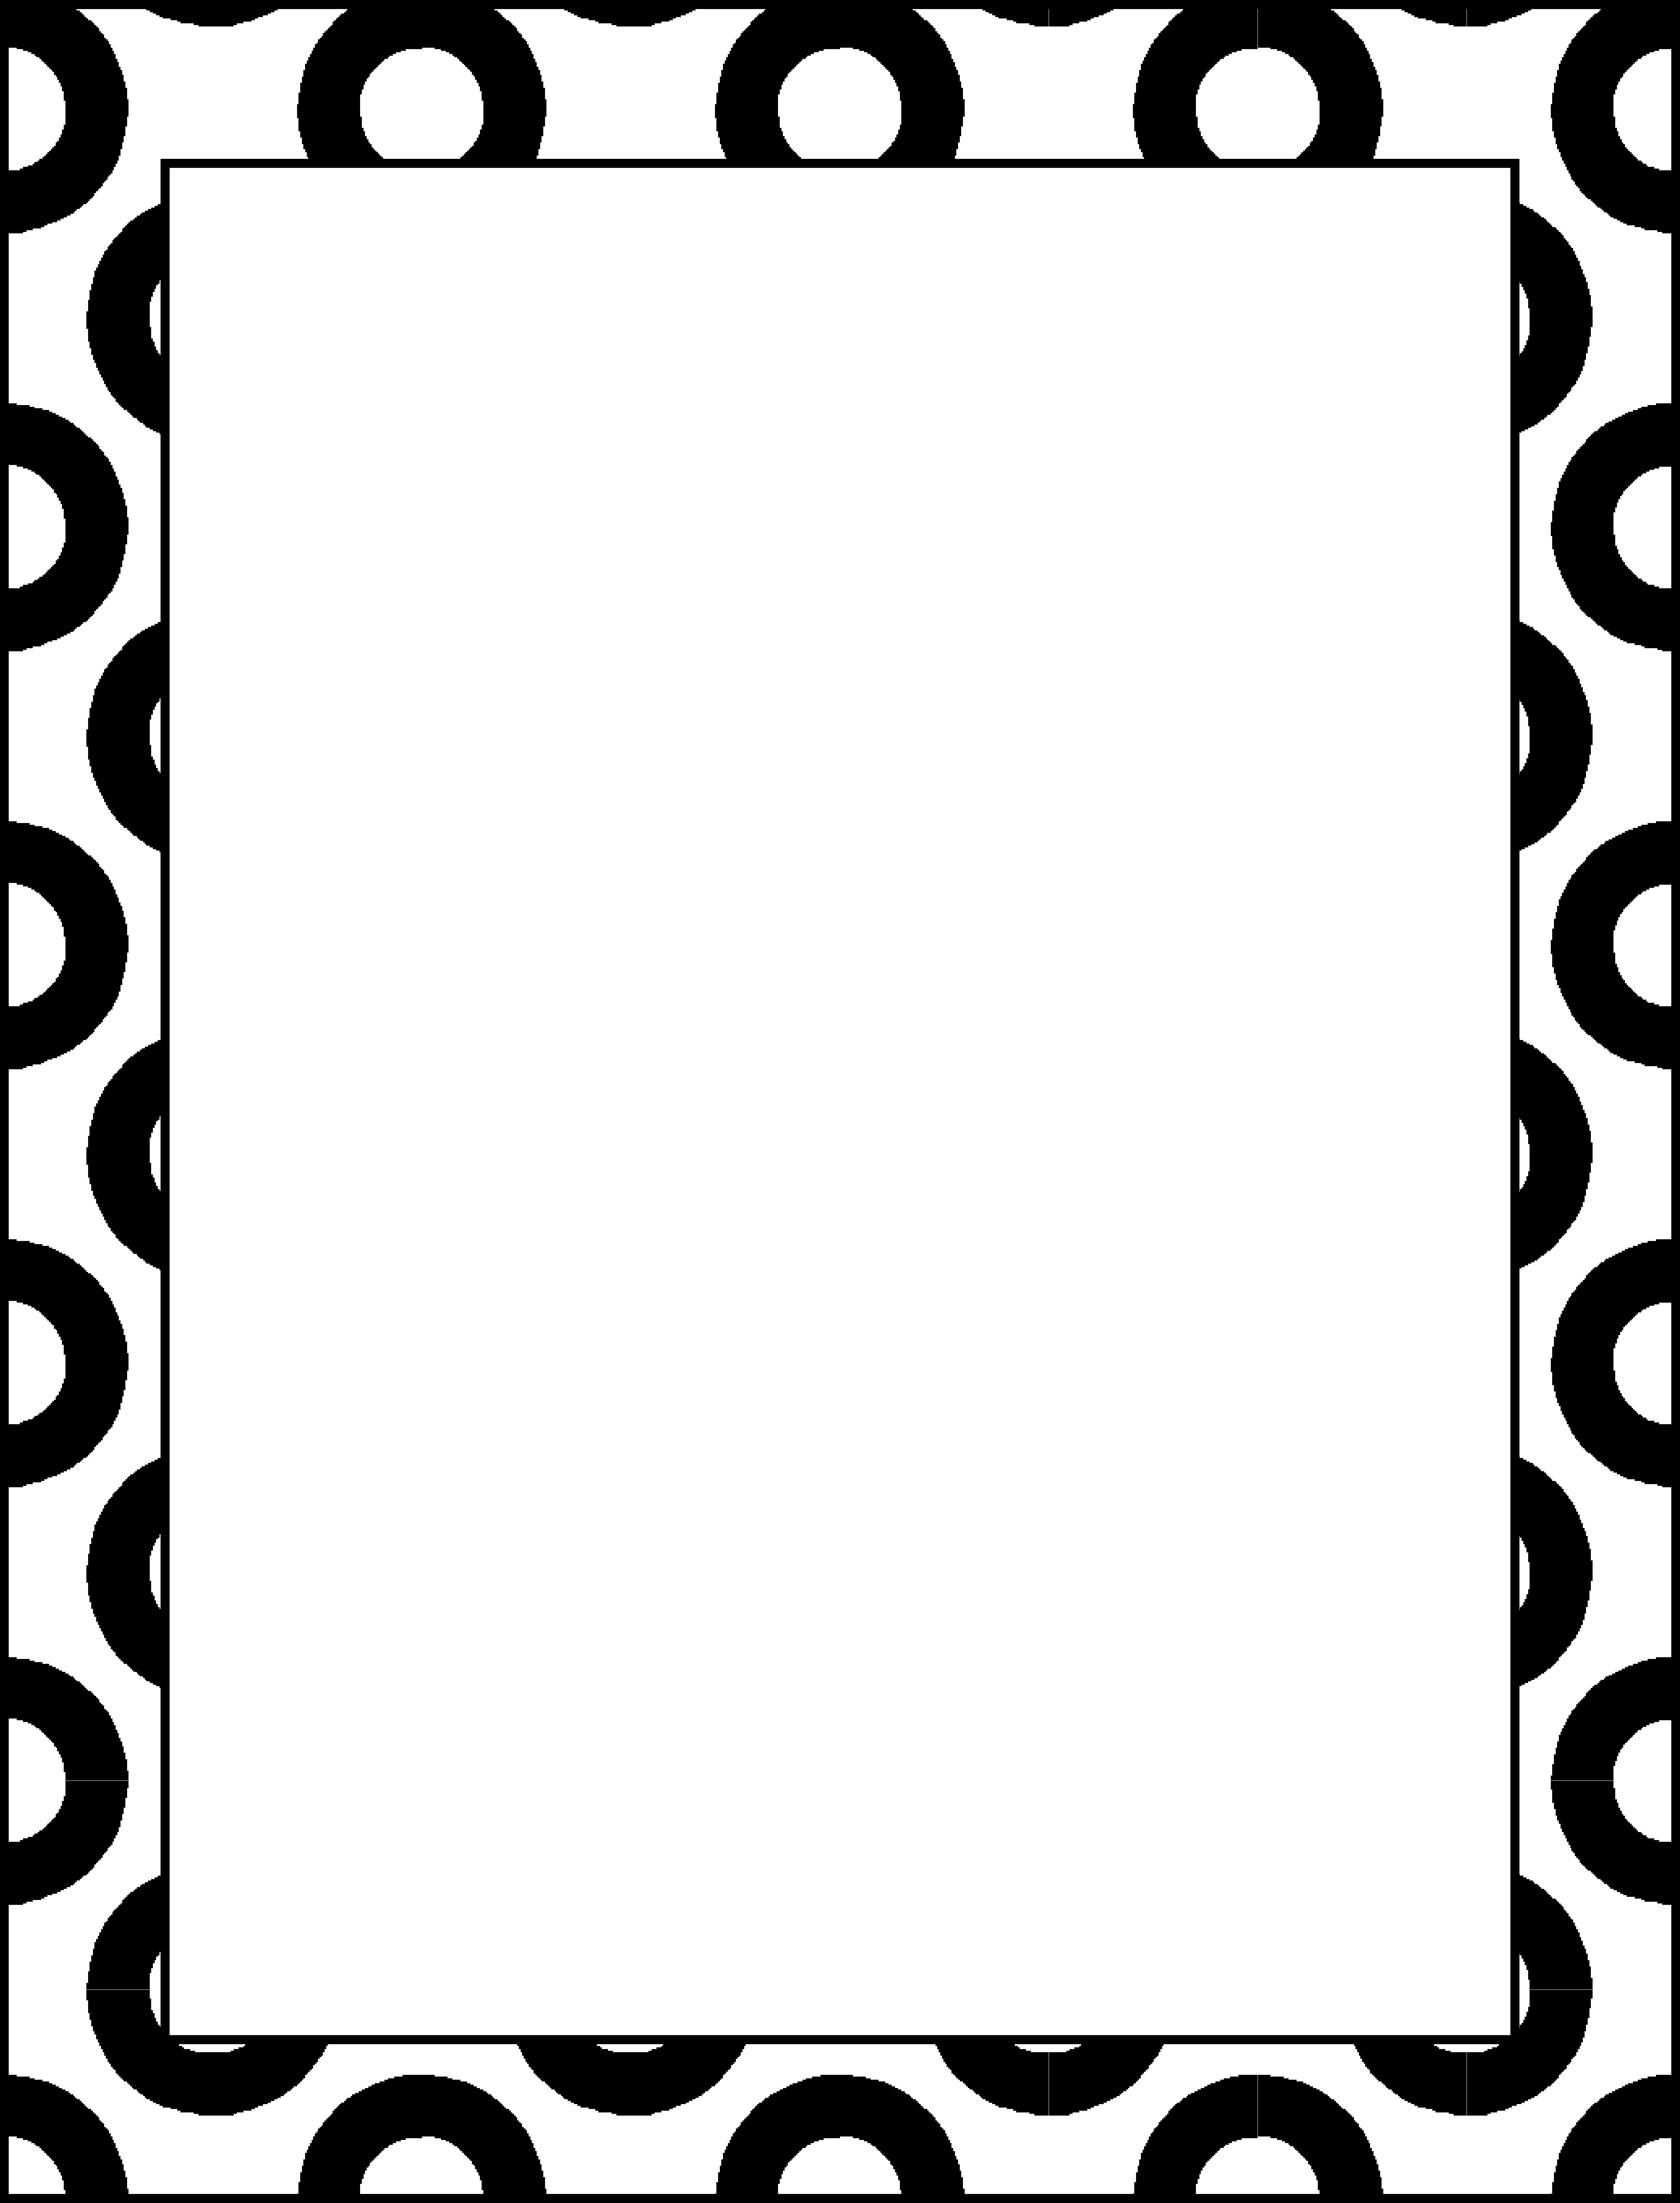 Line Border Designs | Clipart library - Free Clipart Images